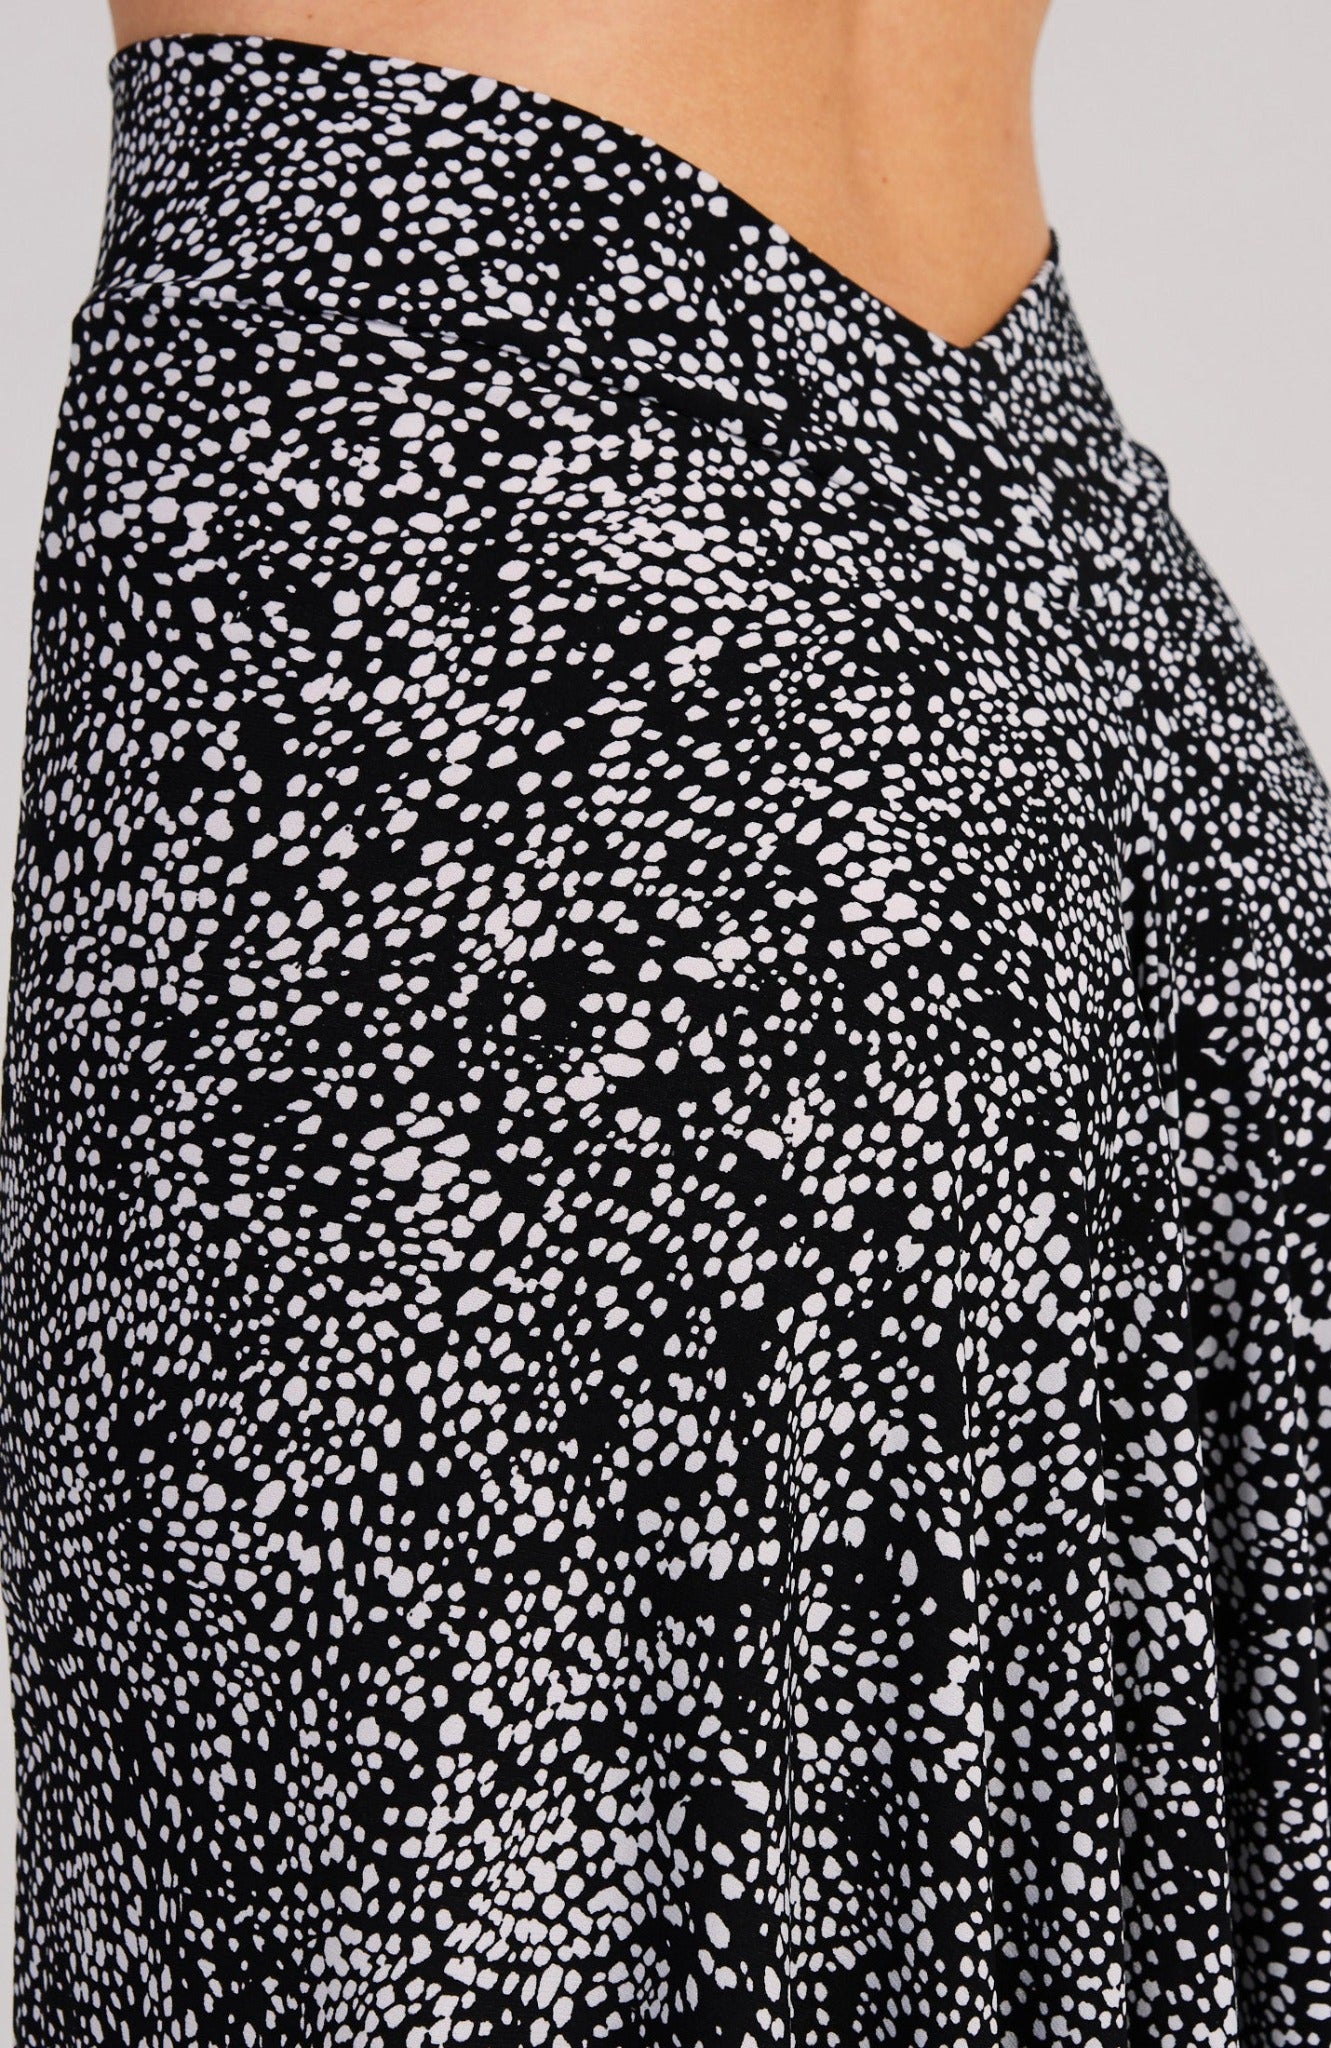 tango skirt in black and white dots